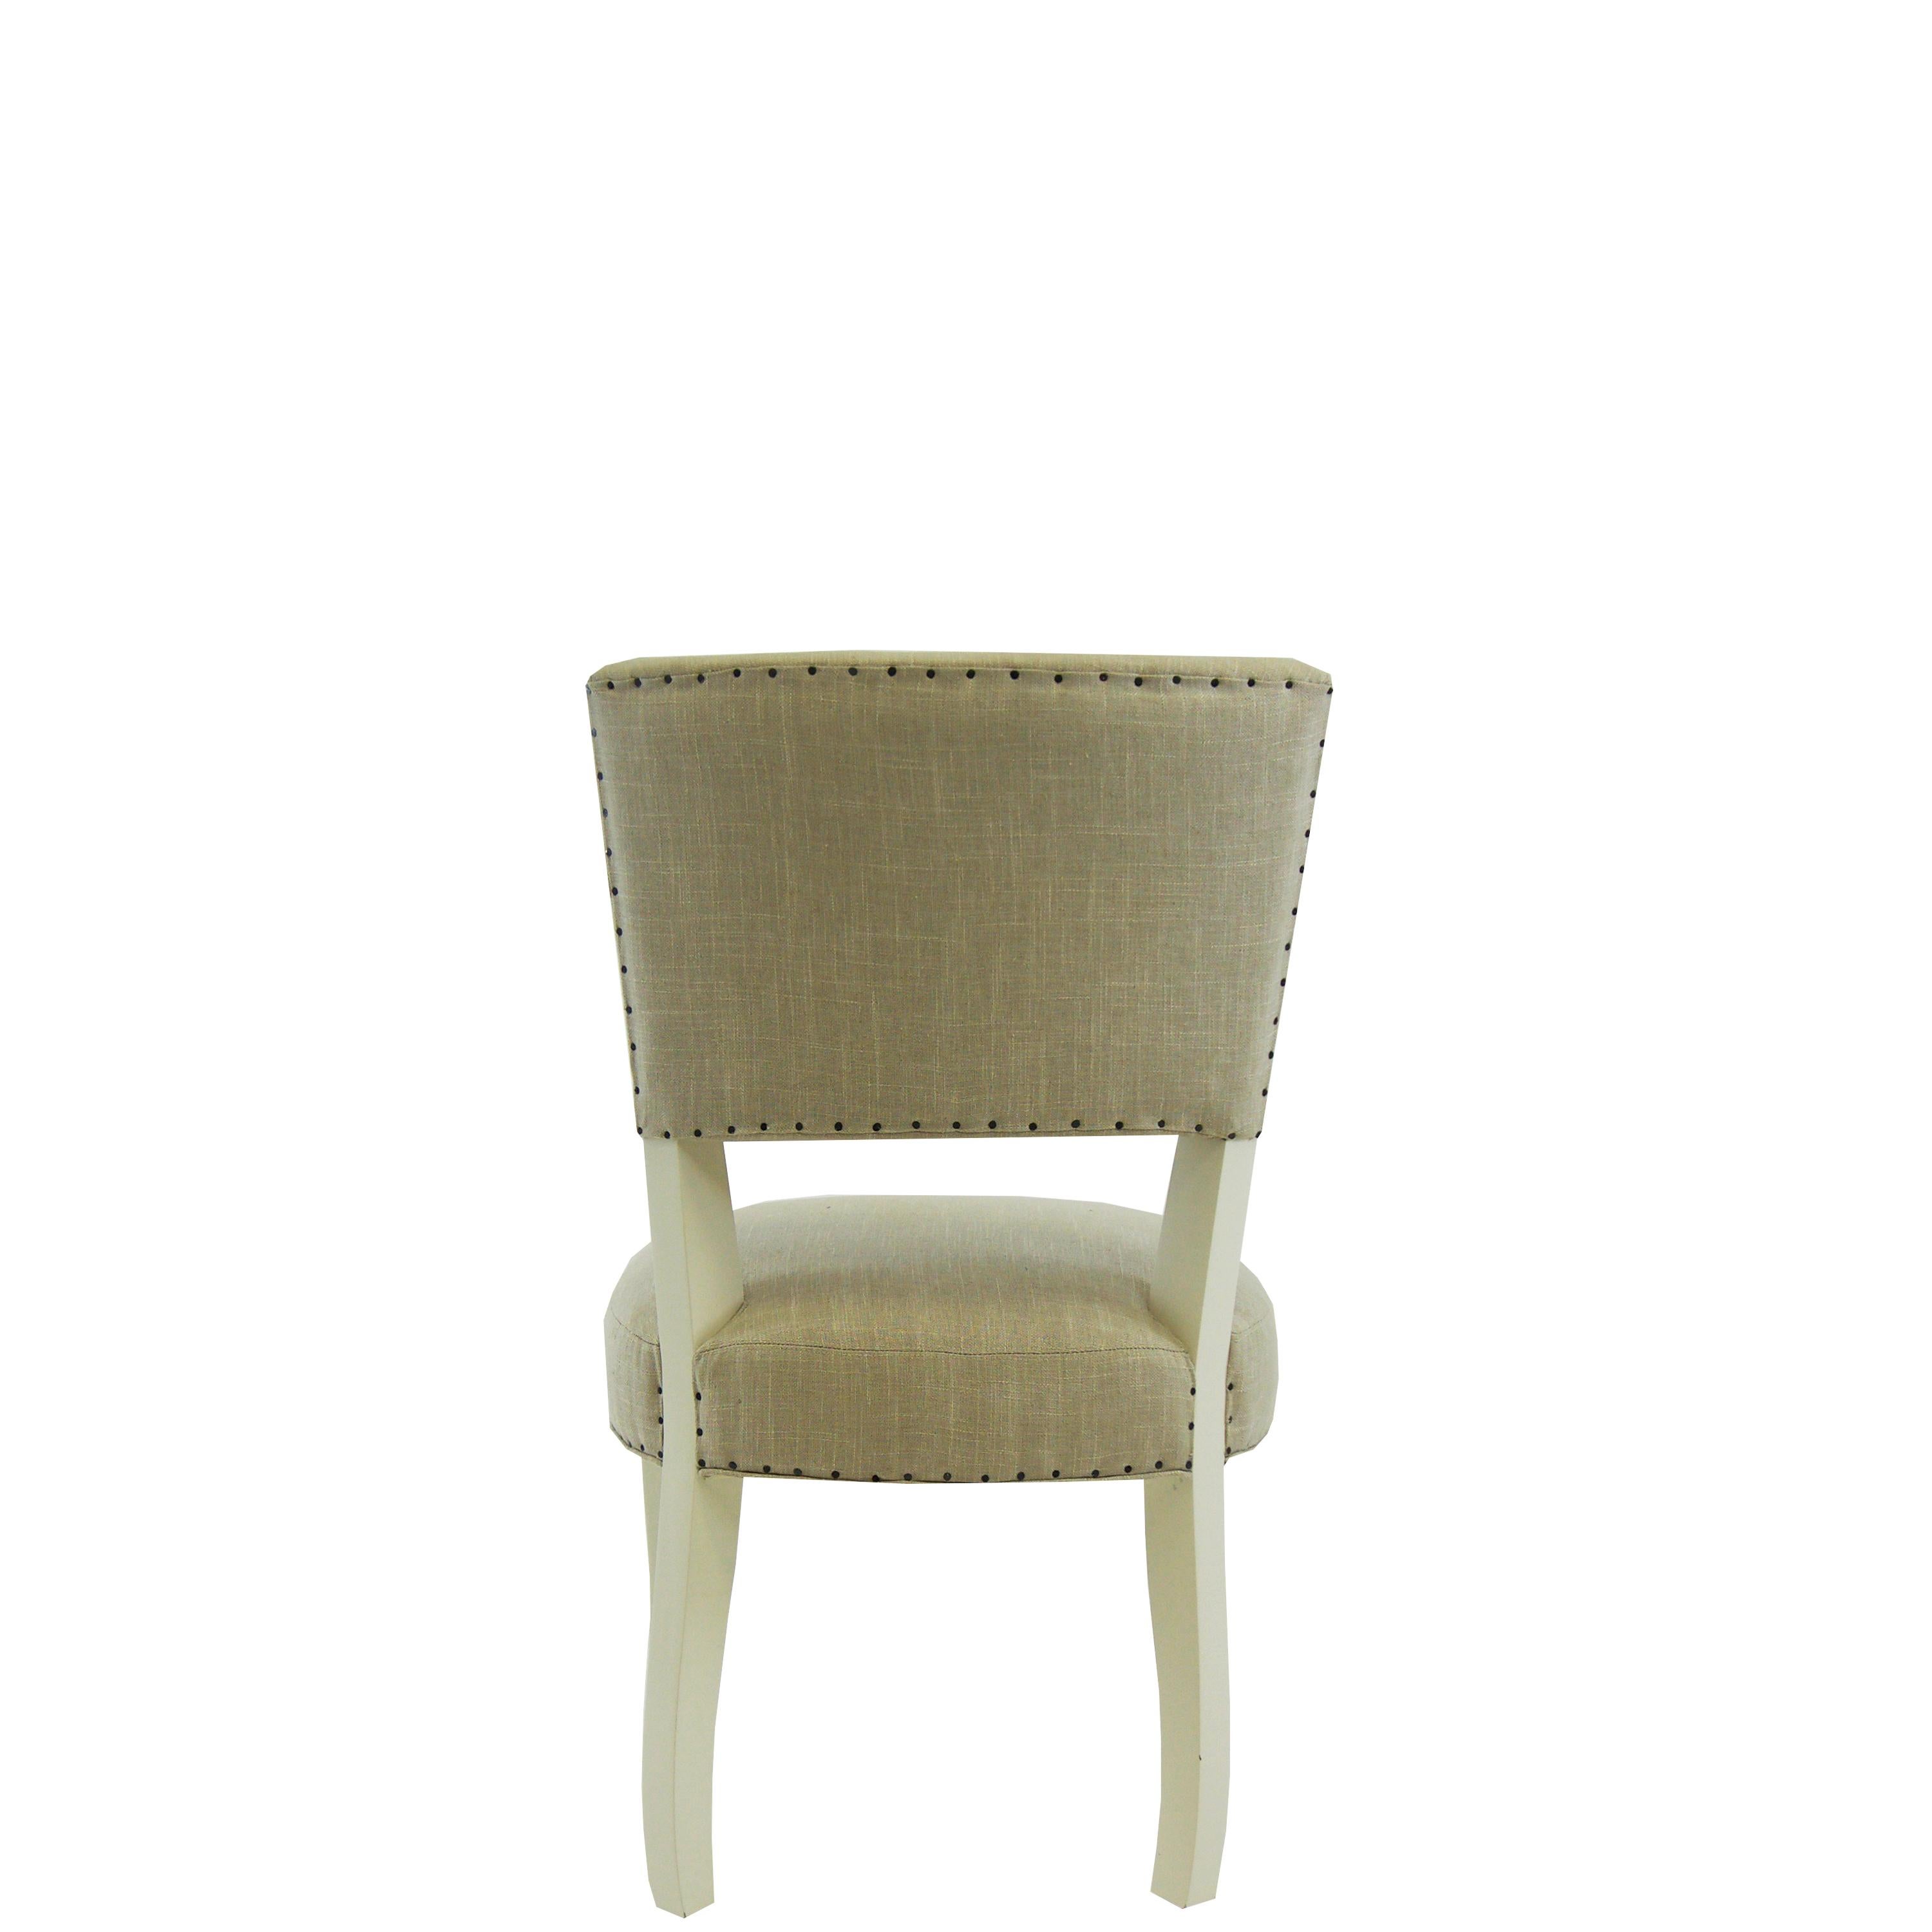 This transitional armless dining chair features a toned down cabriole leg. Comes standard with smoke colored linen and antiqued grey finish. This built to order chair is completely customizable in any finish and fabric*. This piece is handmade from